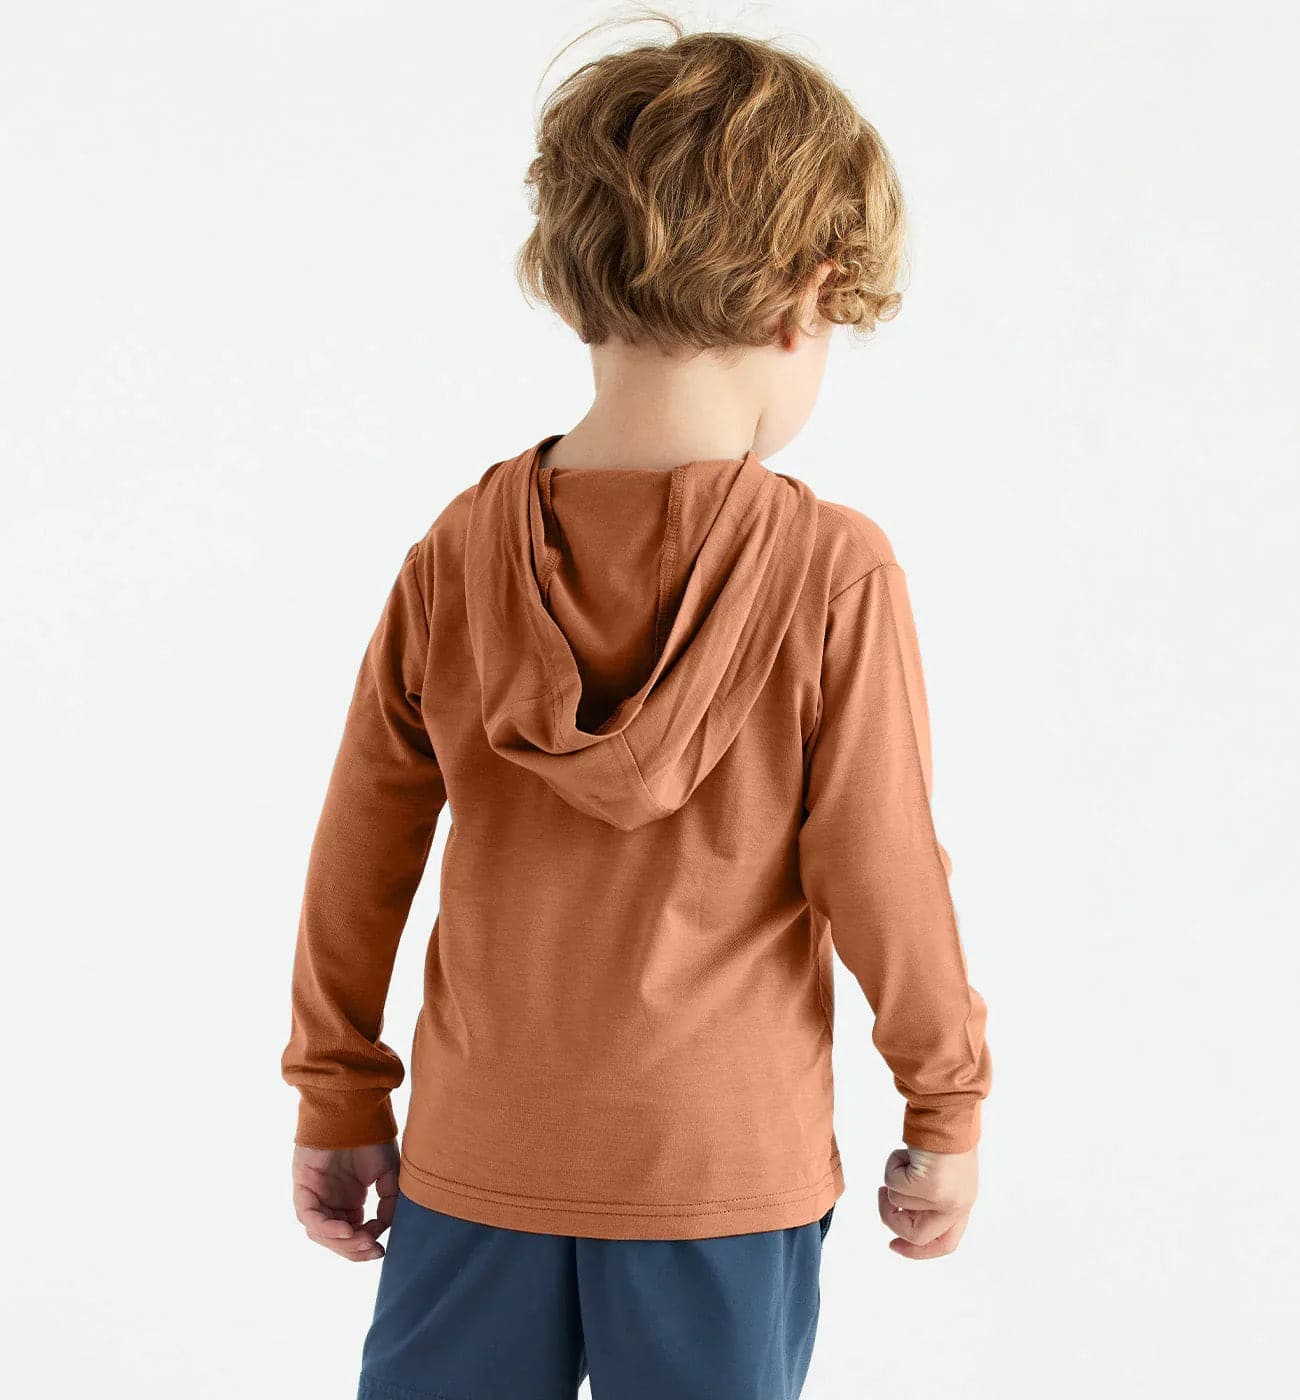 Featuring the Toddler Bamboo Shade Hoody kid's and babies, kid's thermal layering manufactured by Free Fly shown here from a second angle.